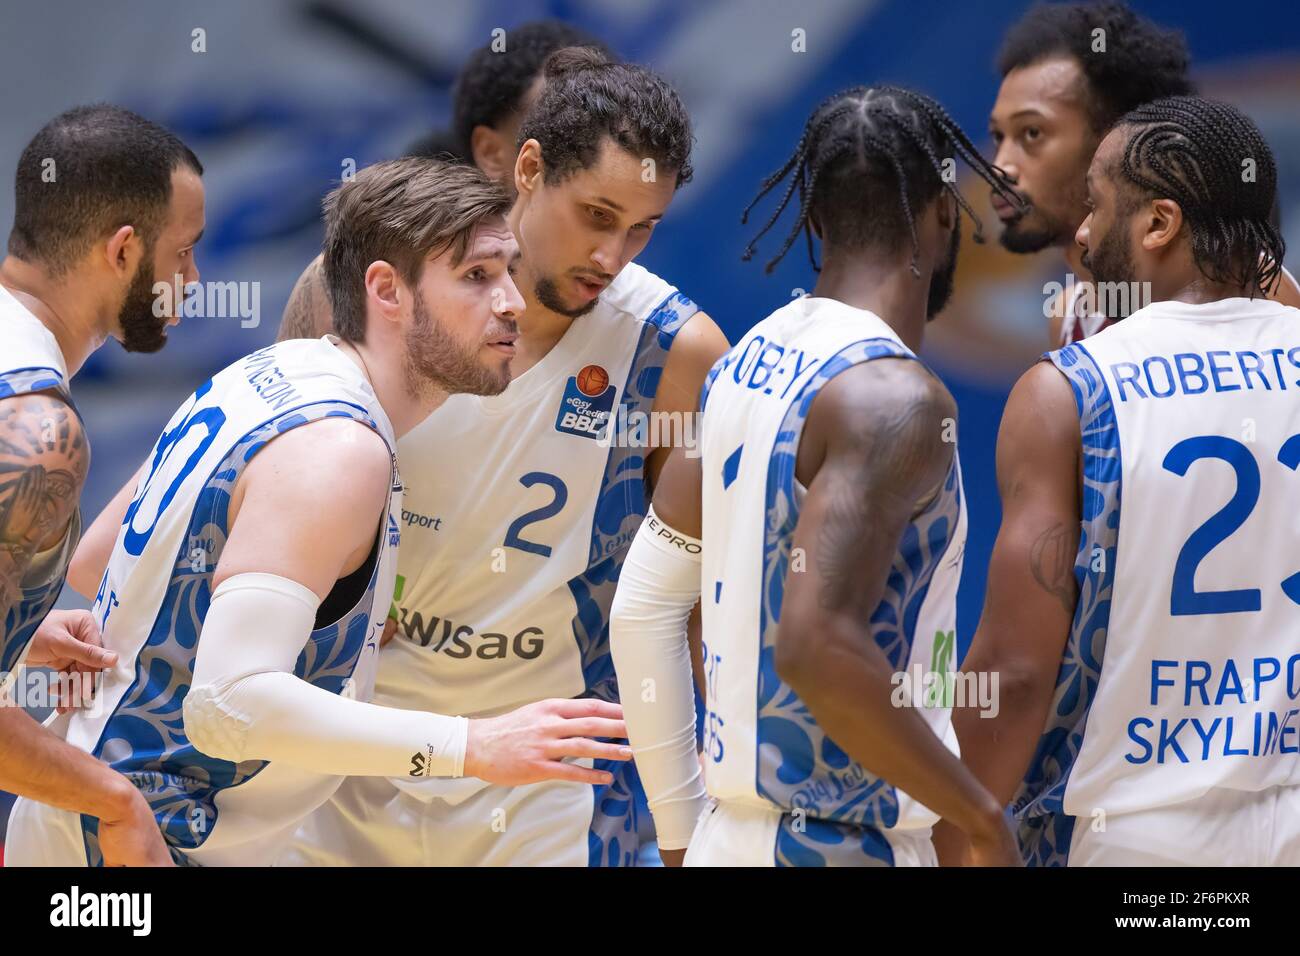 01 April 2021, Hessen, Frankfurt/Main: Team meeting of the Skyliners. Jon  Axel Gudmundsson (Fraport Skyliners, 30, second from left) gives  instructions. Basketball game of the easyCredit BBL between Fraport  Skyliners and NINERS